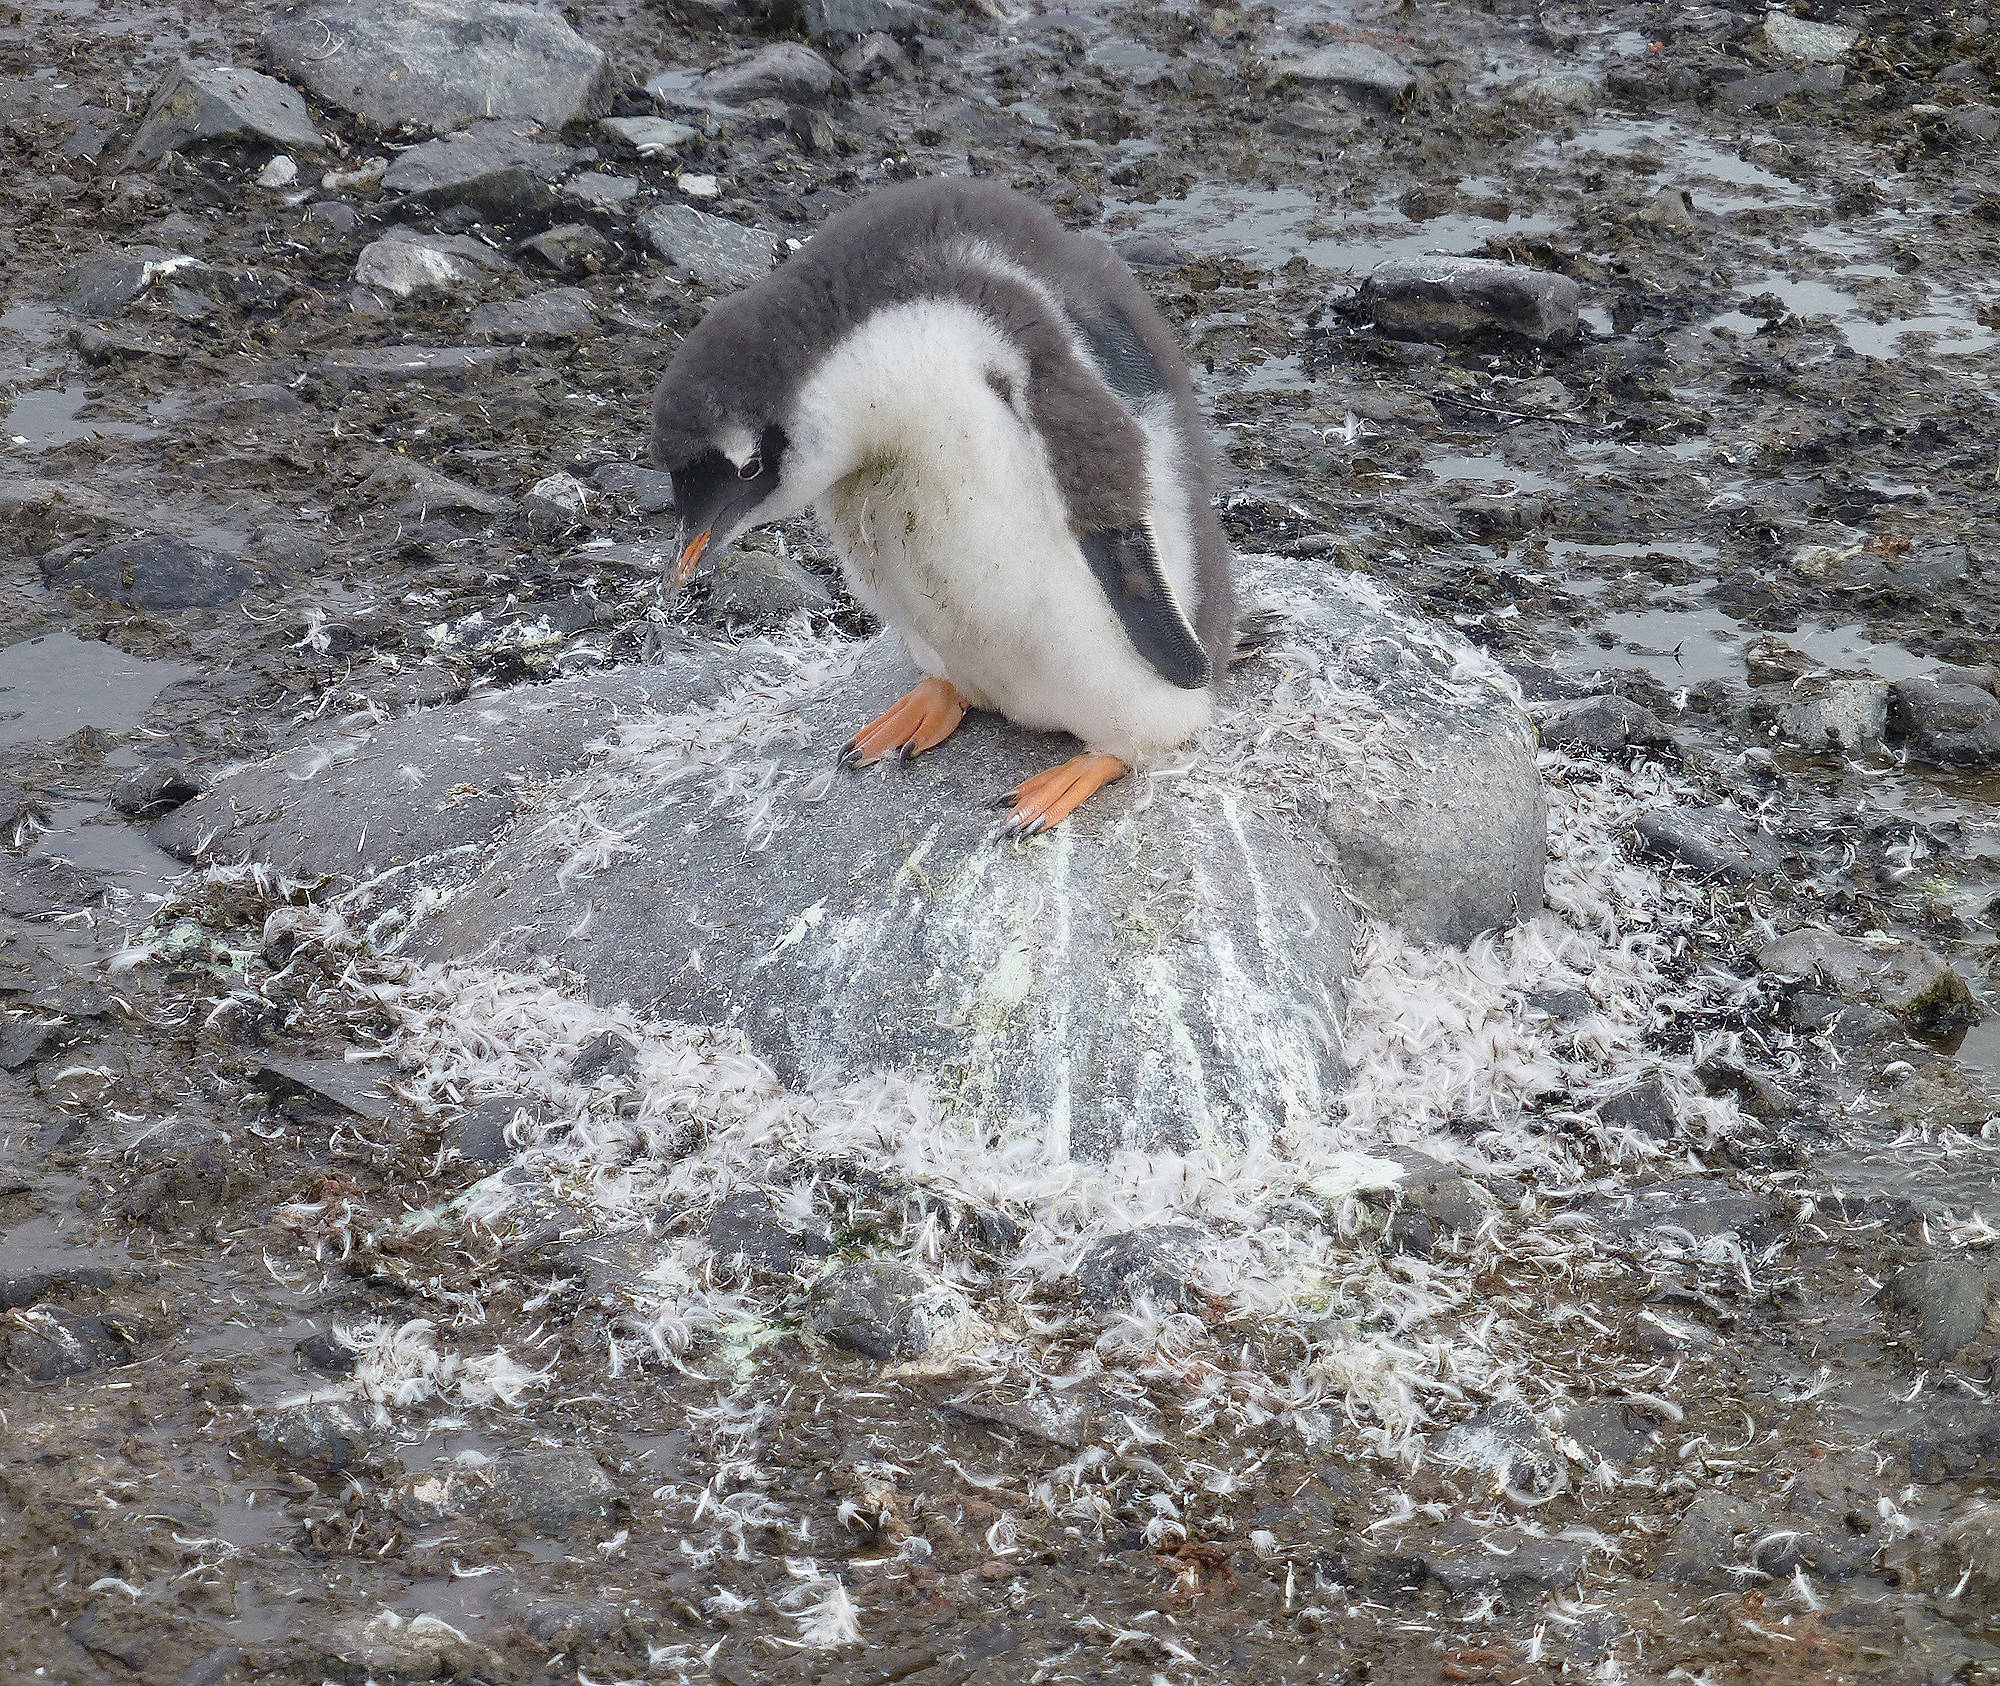 Gentoo penguin contributing nutrients to Cuverville Island. (Photo provided by Sue Mauger)